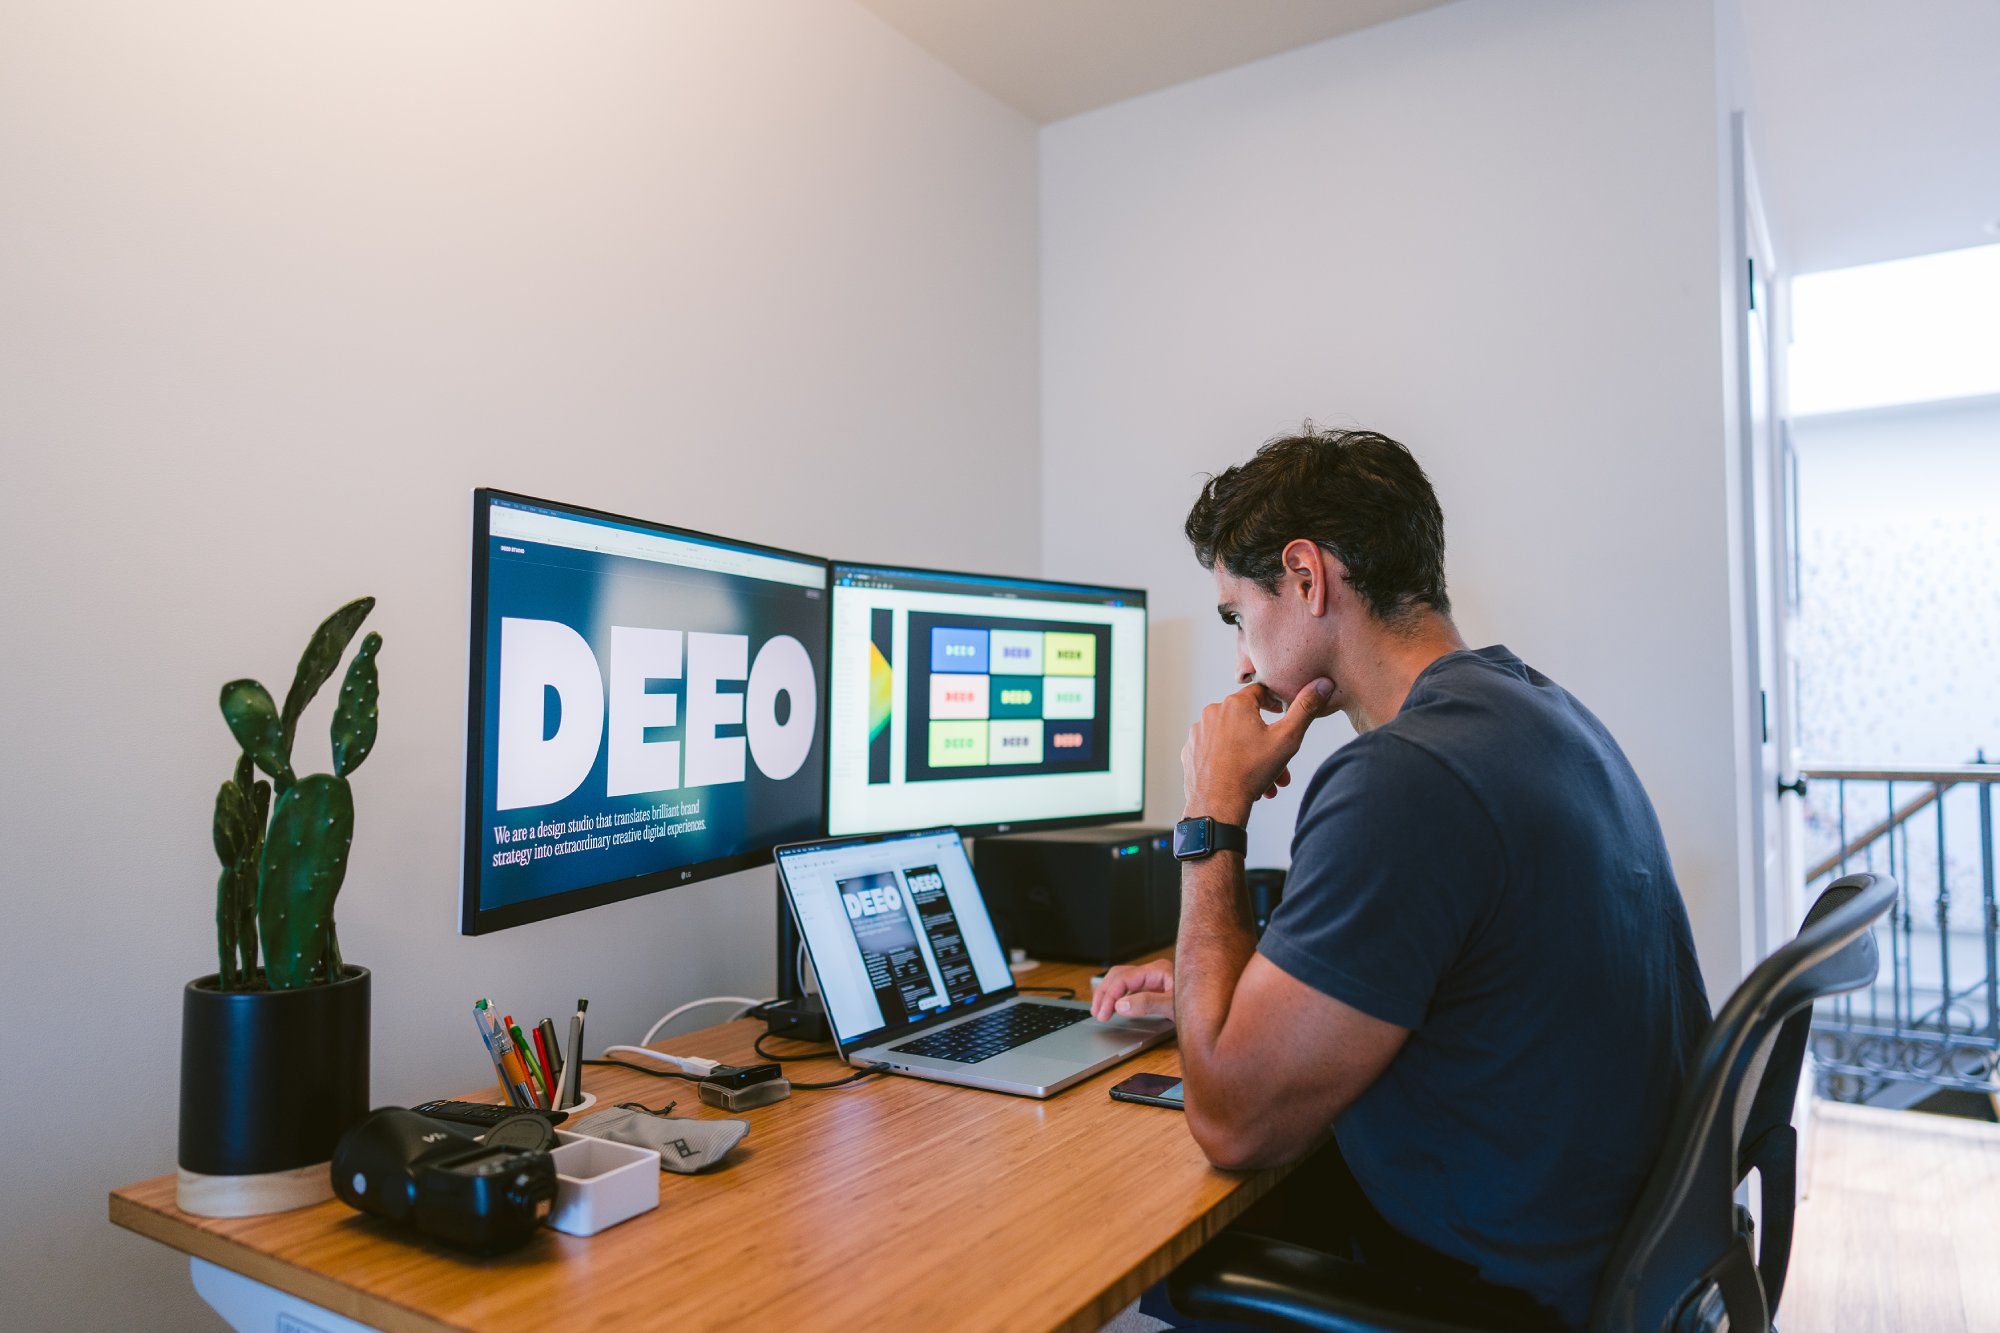 A man is sitting at a wooden desk, deeply engrossed in his work. He is facing a set of dual monitors which display a prominent text DEEO and some design layouts